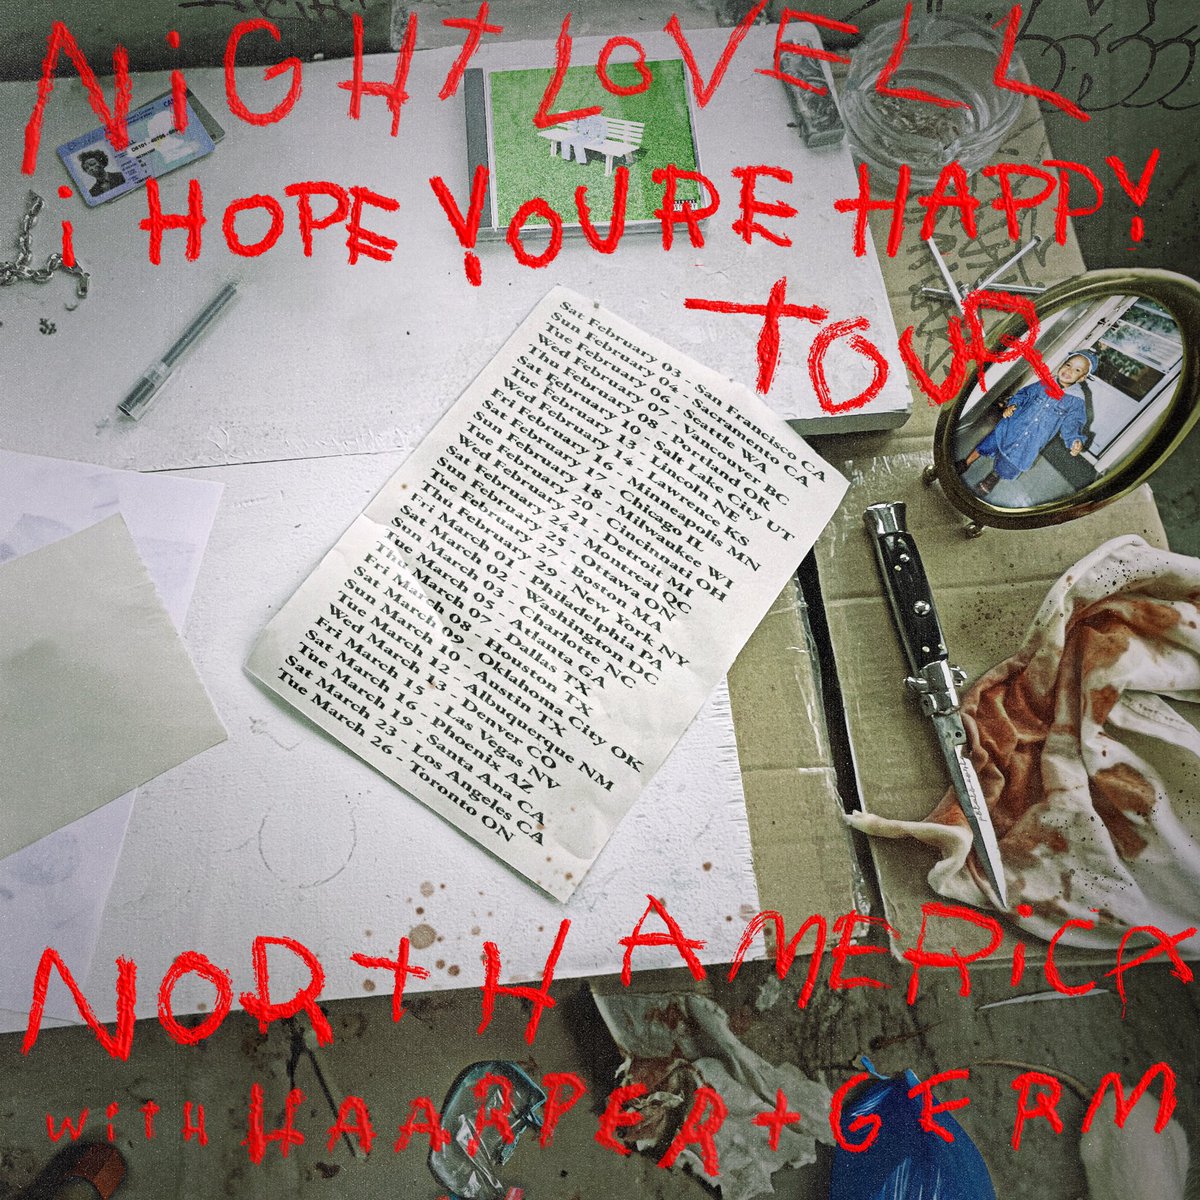 I HOPE YOU’RE HAPPY TOUR TICKETS AVAILABLE NOW @ NIGHTLOVELL.COM/TOUR